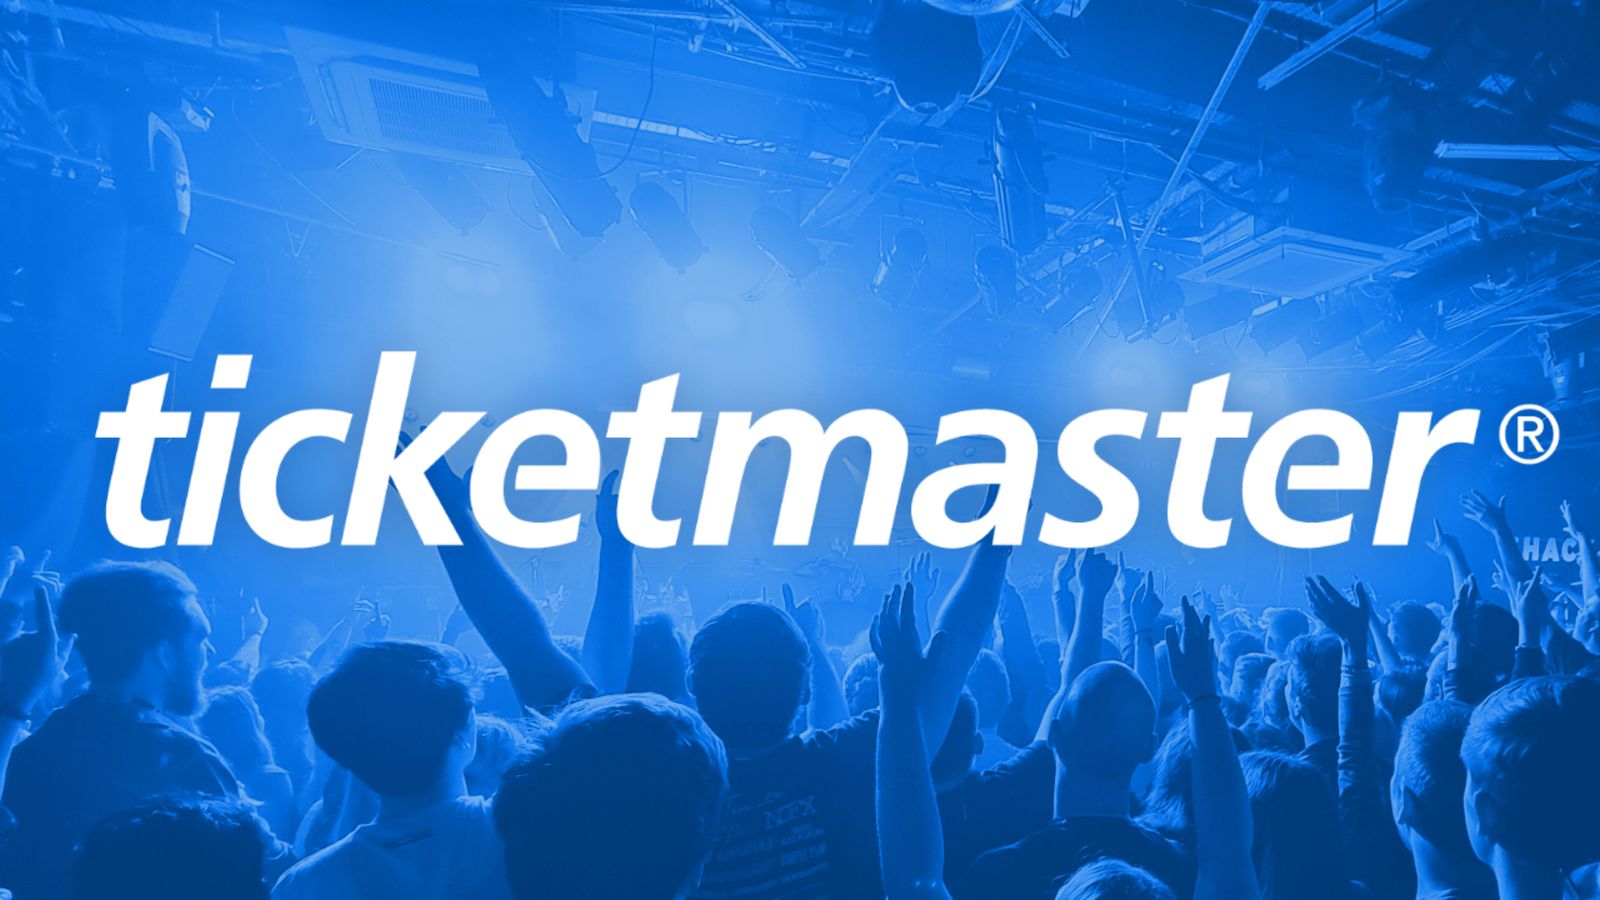 The Ticketmaster logo with an image of a concert crowd with a blue filter in the background